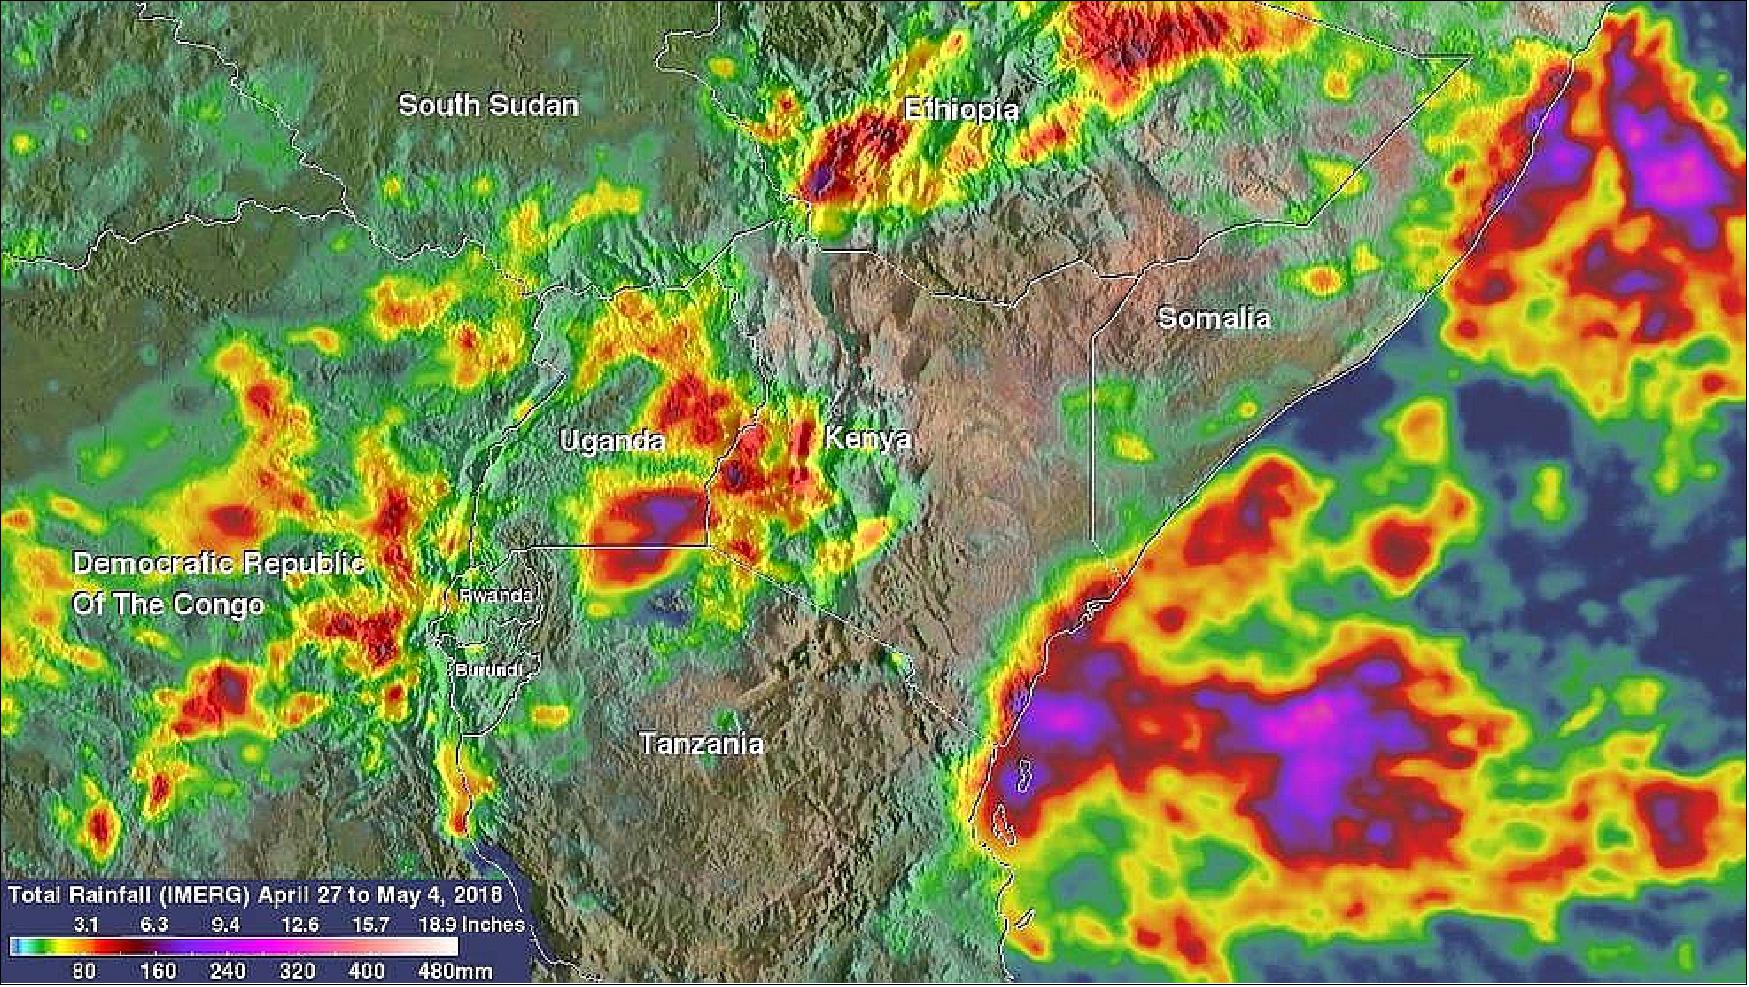 Figure 35: From April 27 to early May 4, 2018, NASA’s IMERG product calculated rainfall over eastern Africa. Rainfall totals in some areas near the Indian Ocean coast were estimated by IMERG to be greater than 430 mm. Over western Kenya and eastern Uganda rainfall was estimated by IMERG to frequently exceed 200 mm (image credit: NASA/JAXA, Hal Pierce)